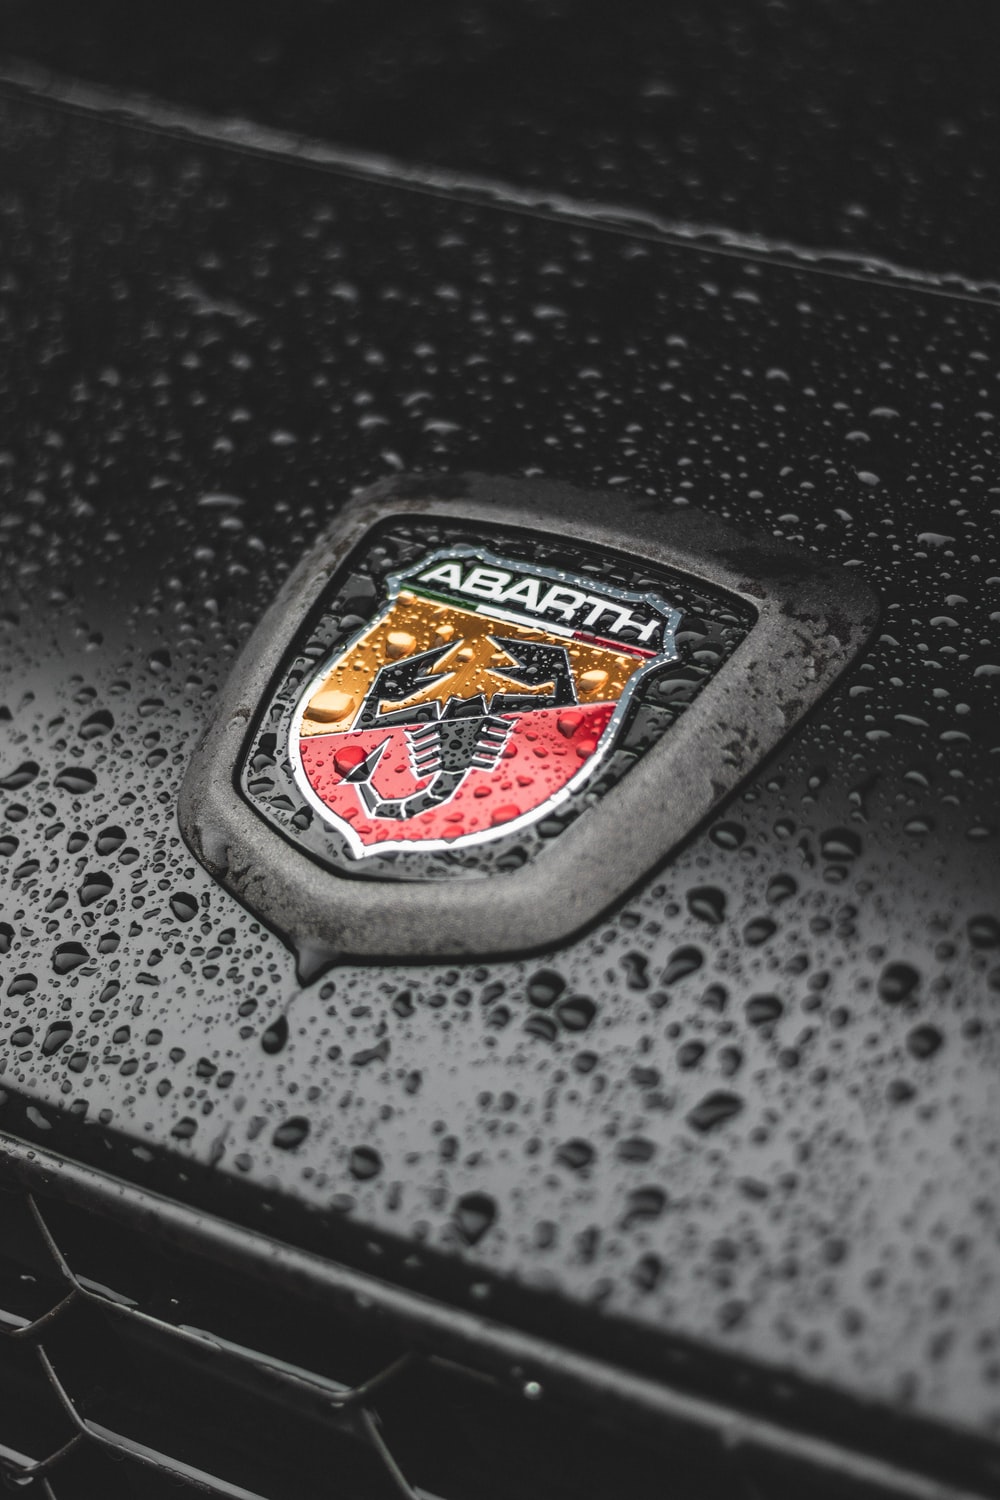 Abarth Picture. Download Free Image